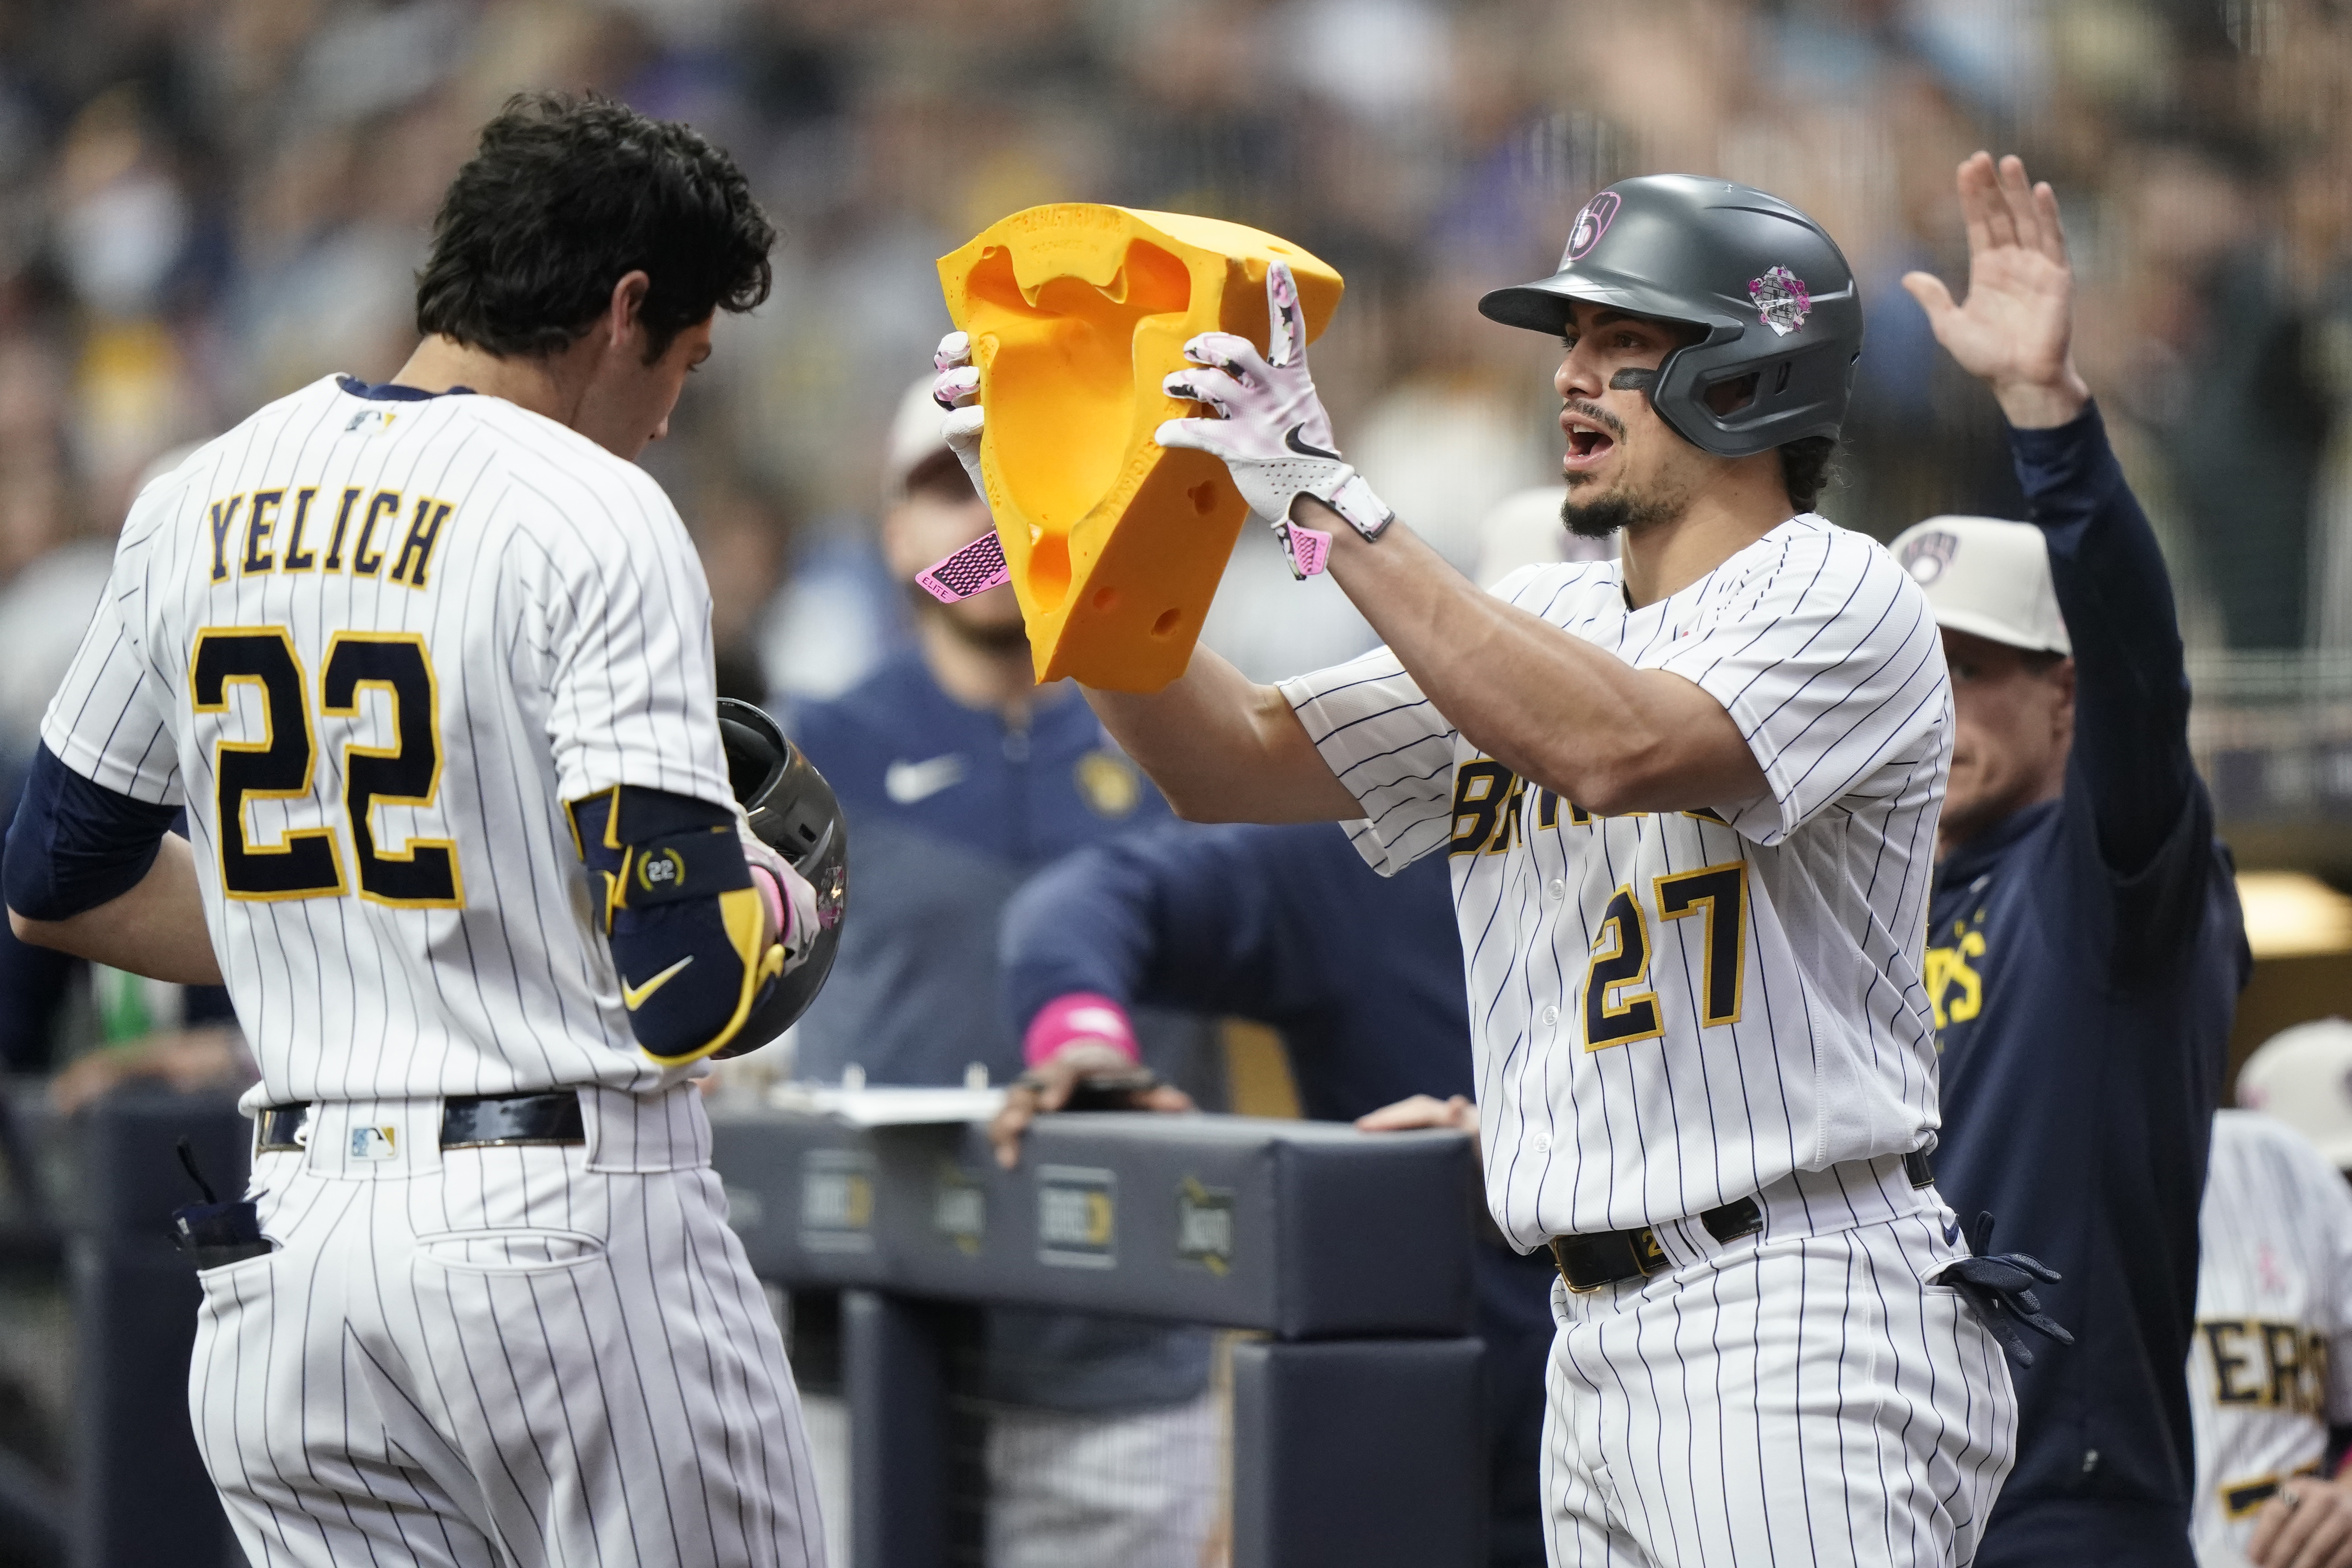 Milwaukee Brewers: Willy Adames Hits Home Run Against Tampa Bay